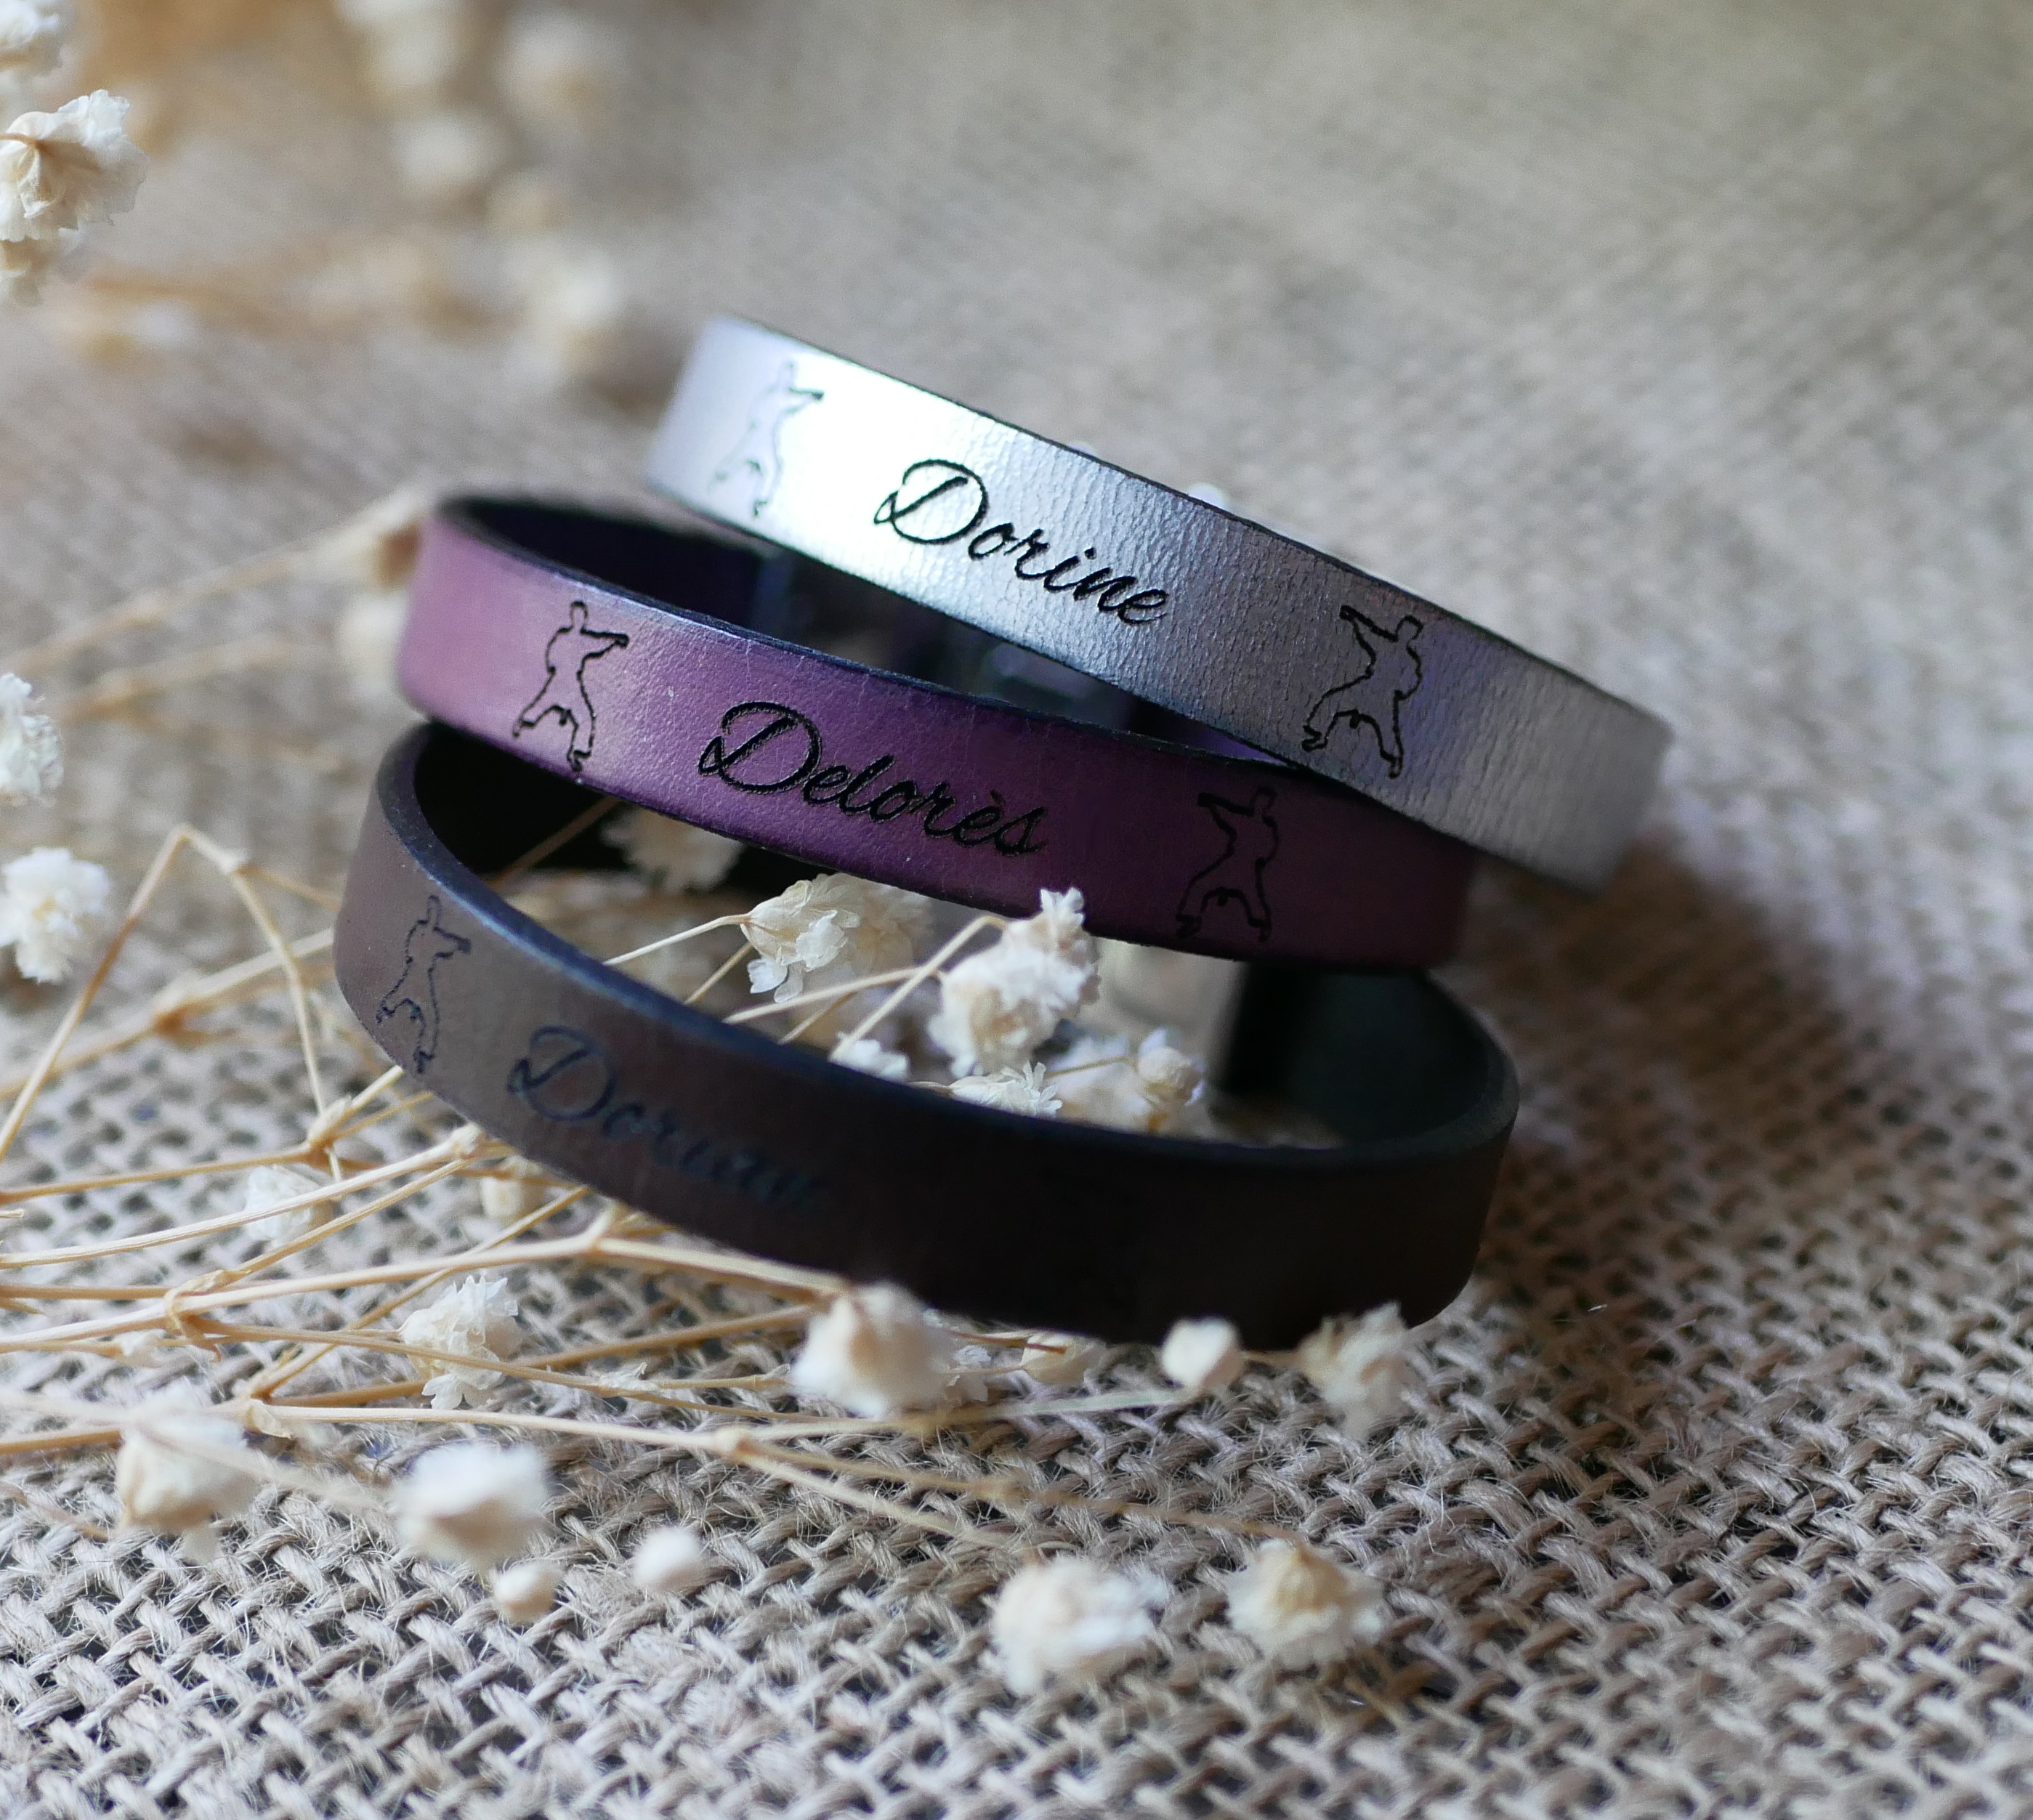 Personalized leather bracelet for children engraved first name framed with drawings of your choice